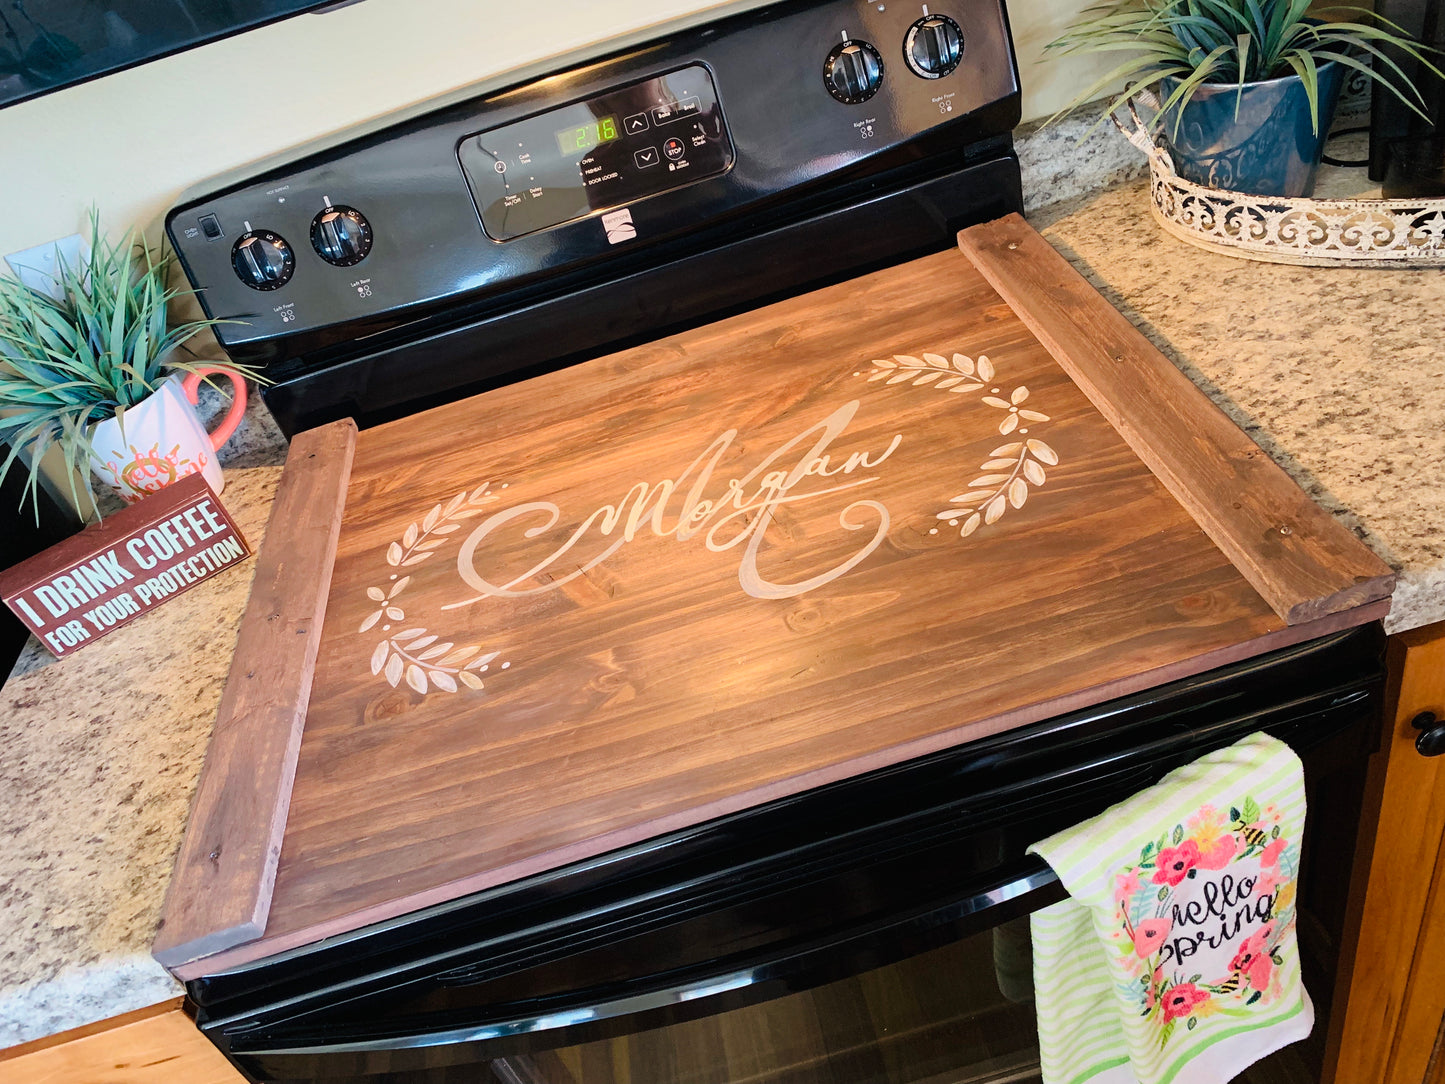 Stove & sink cover { Pine } You choose color. Stained & painted. 4 coats polyurethane. Handles. 3 ft long x 24 inch. 2 in 1! You choose color. - Stacy's Pink Martini Boutique